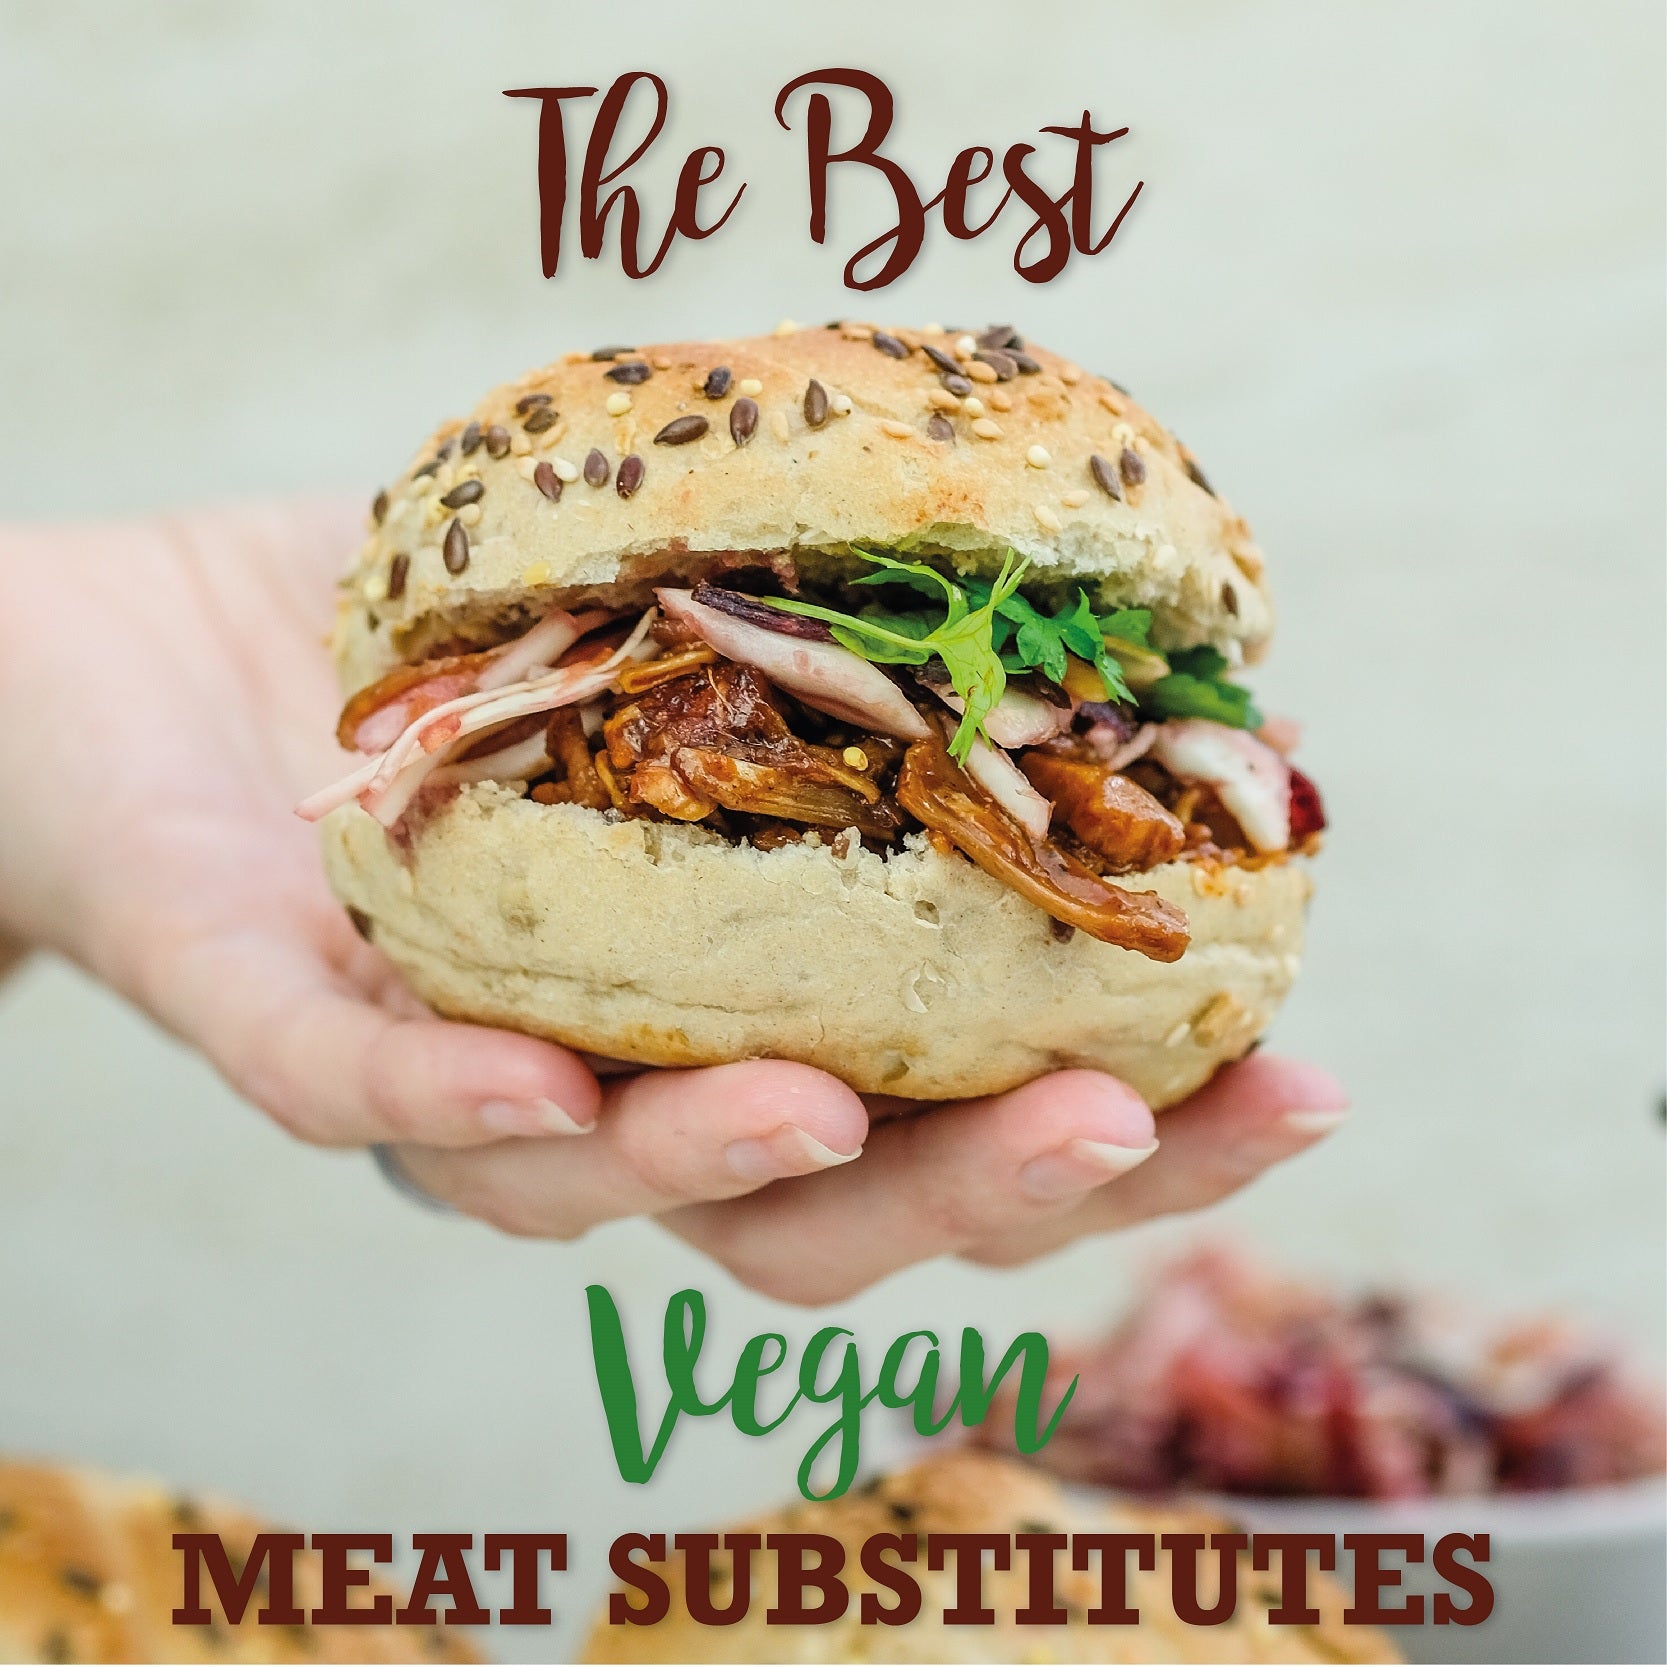 4 Healthy and Delicious Meat Substitutes to Try this Veganuary